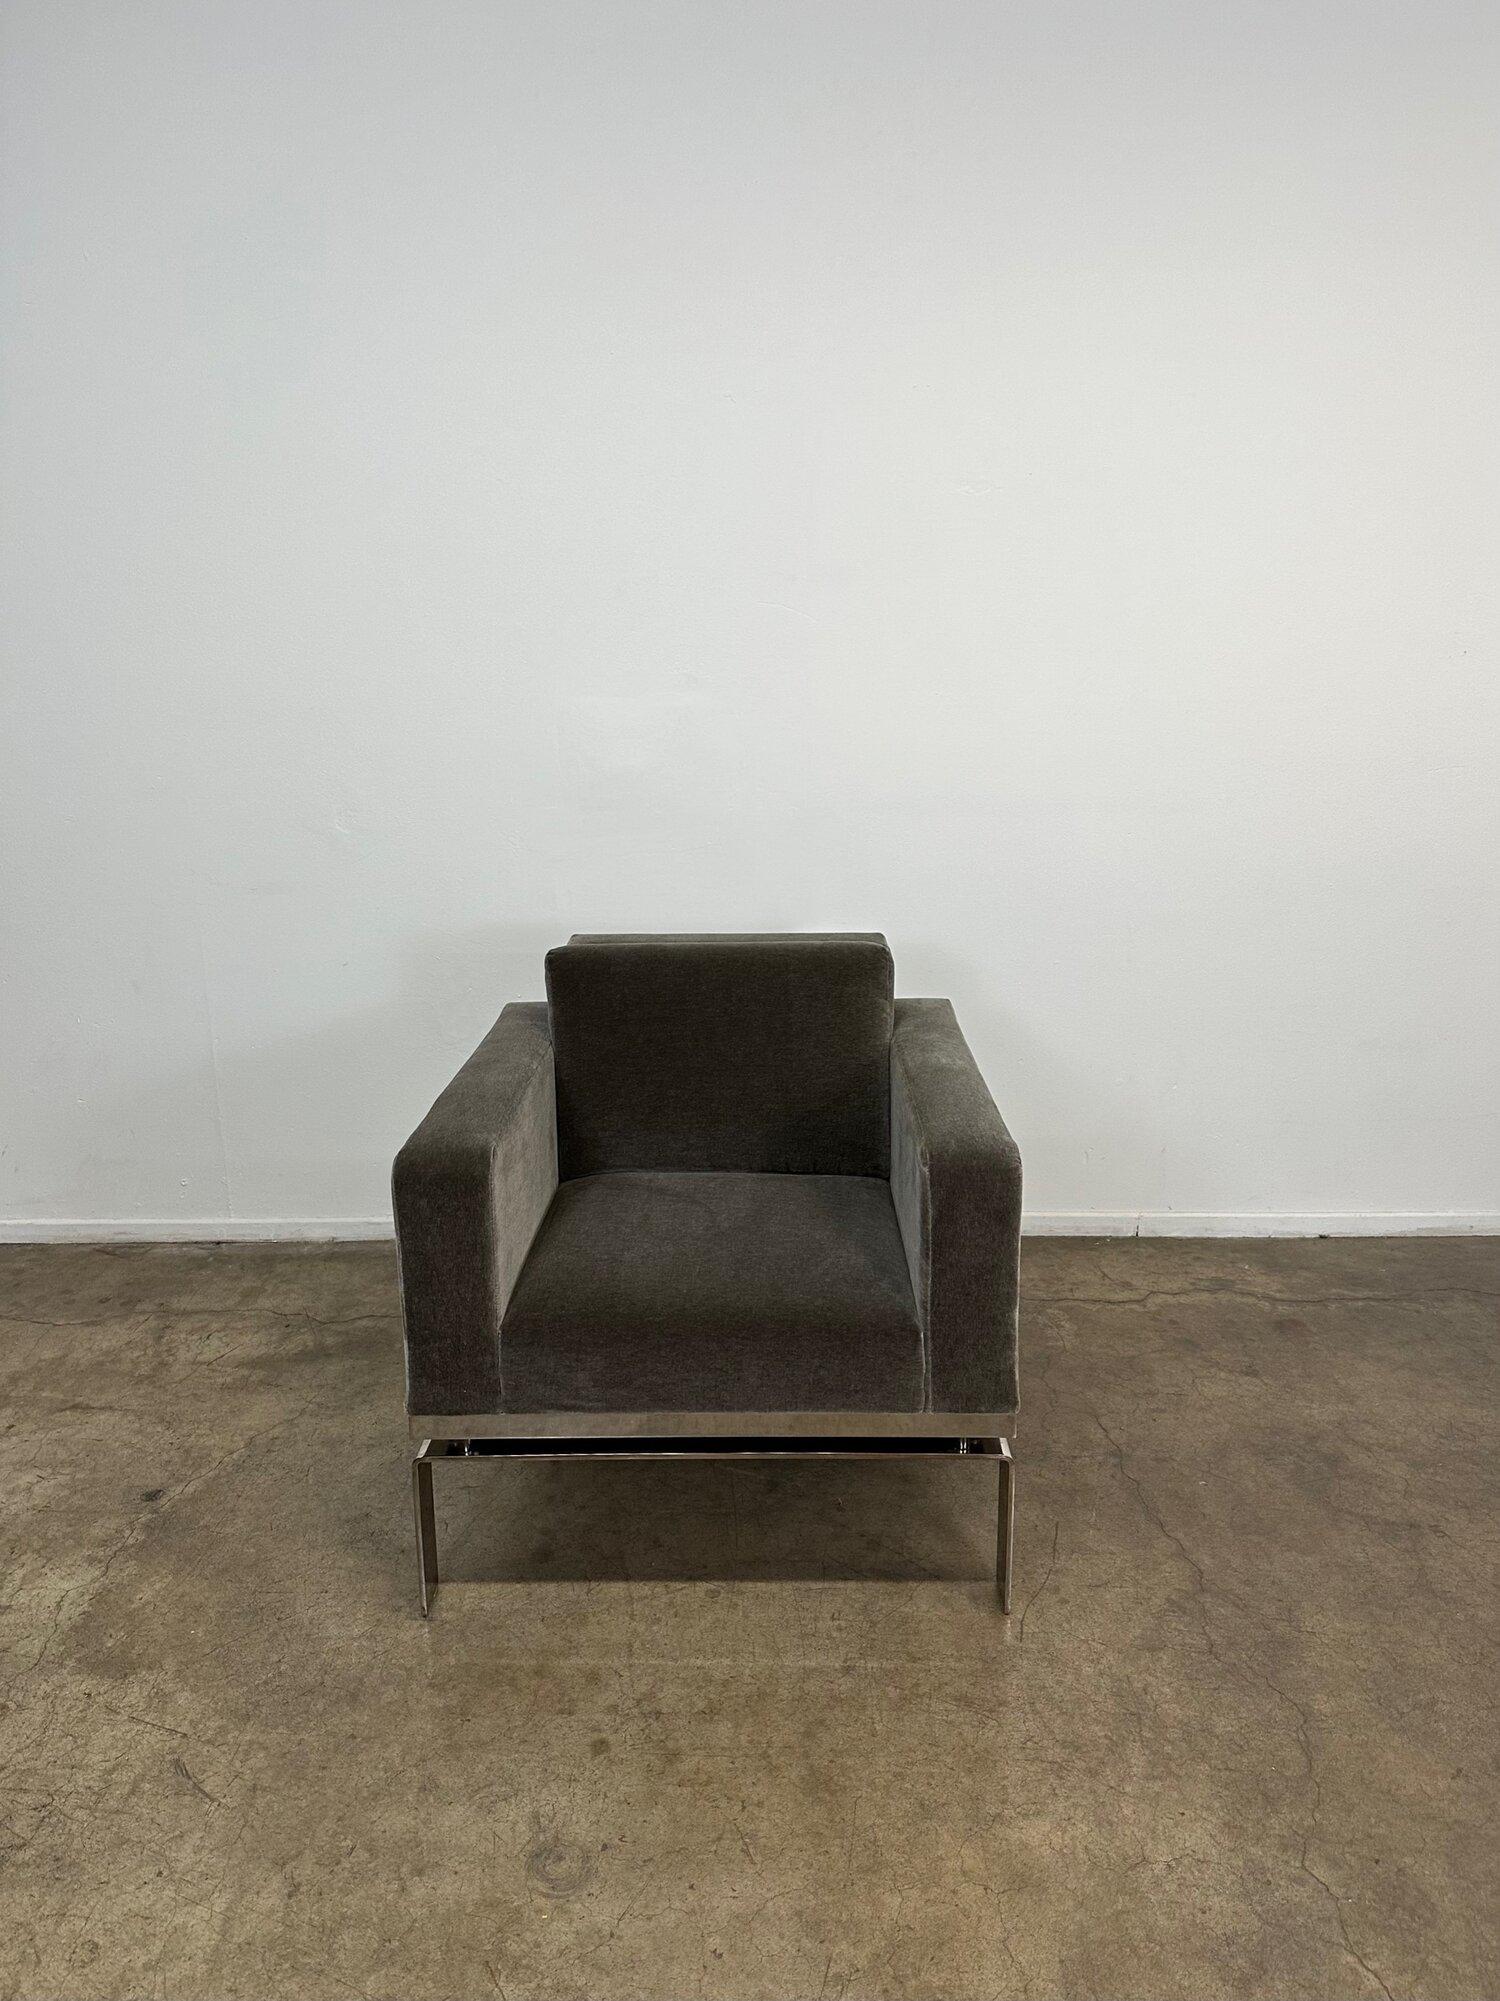 American Contemporary Chrome and Mohair Lounge Chair by Martin Brattrud Series One